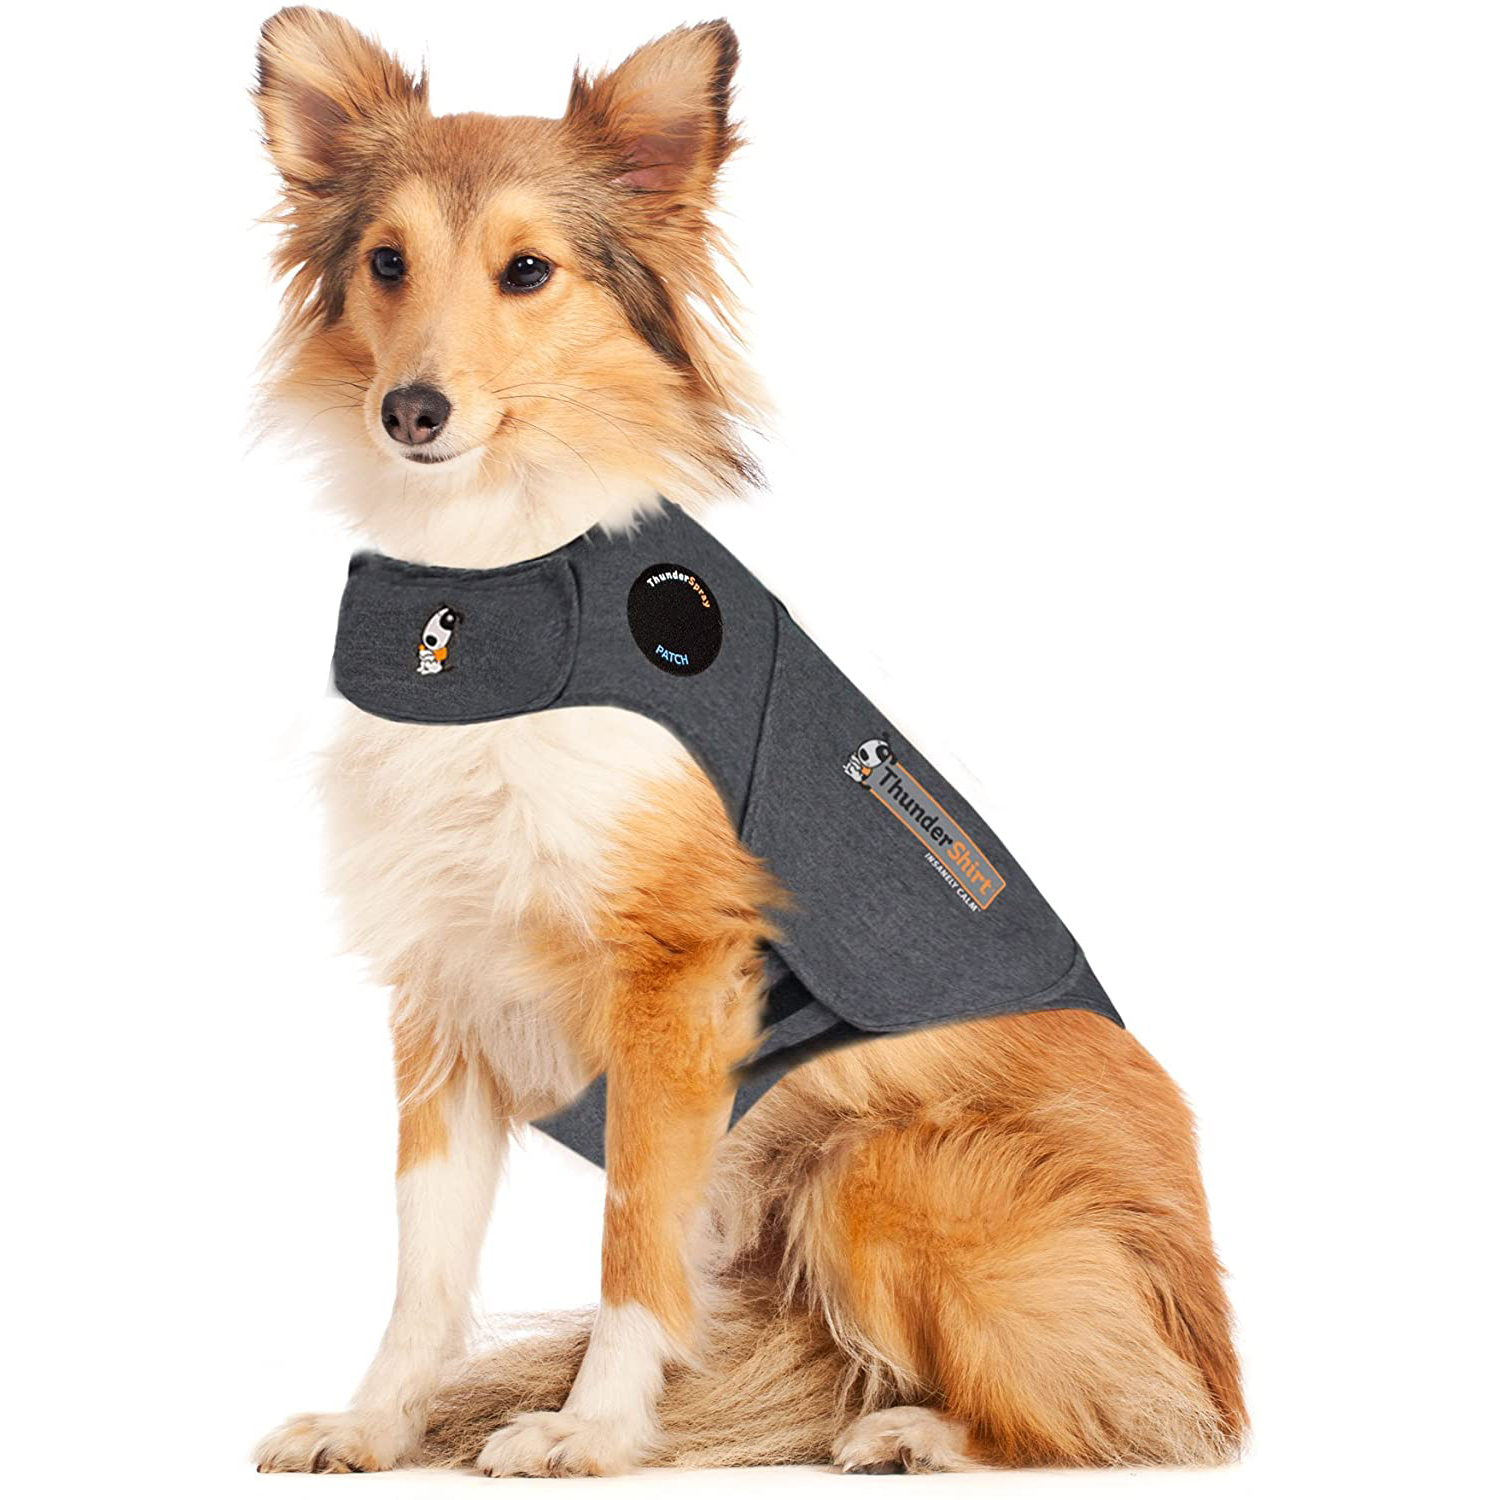 ThunderShirt Classic Anxiety Vest for Dogs